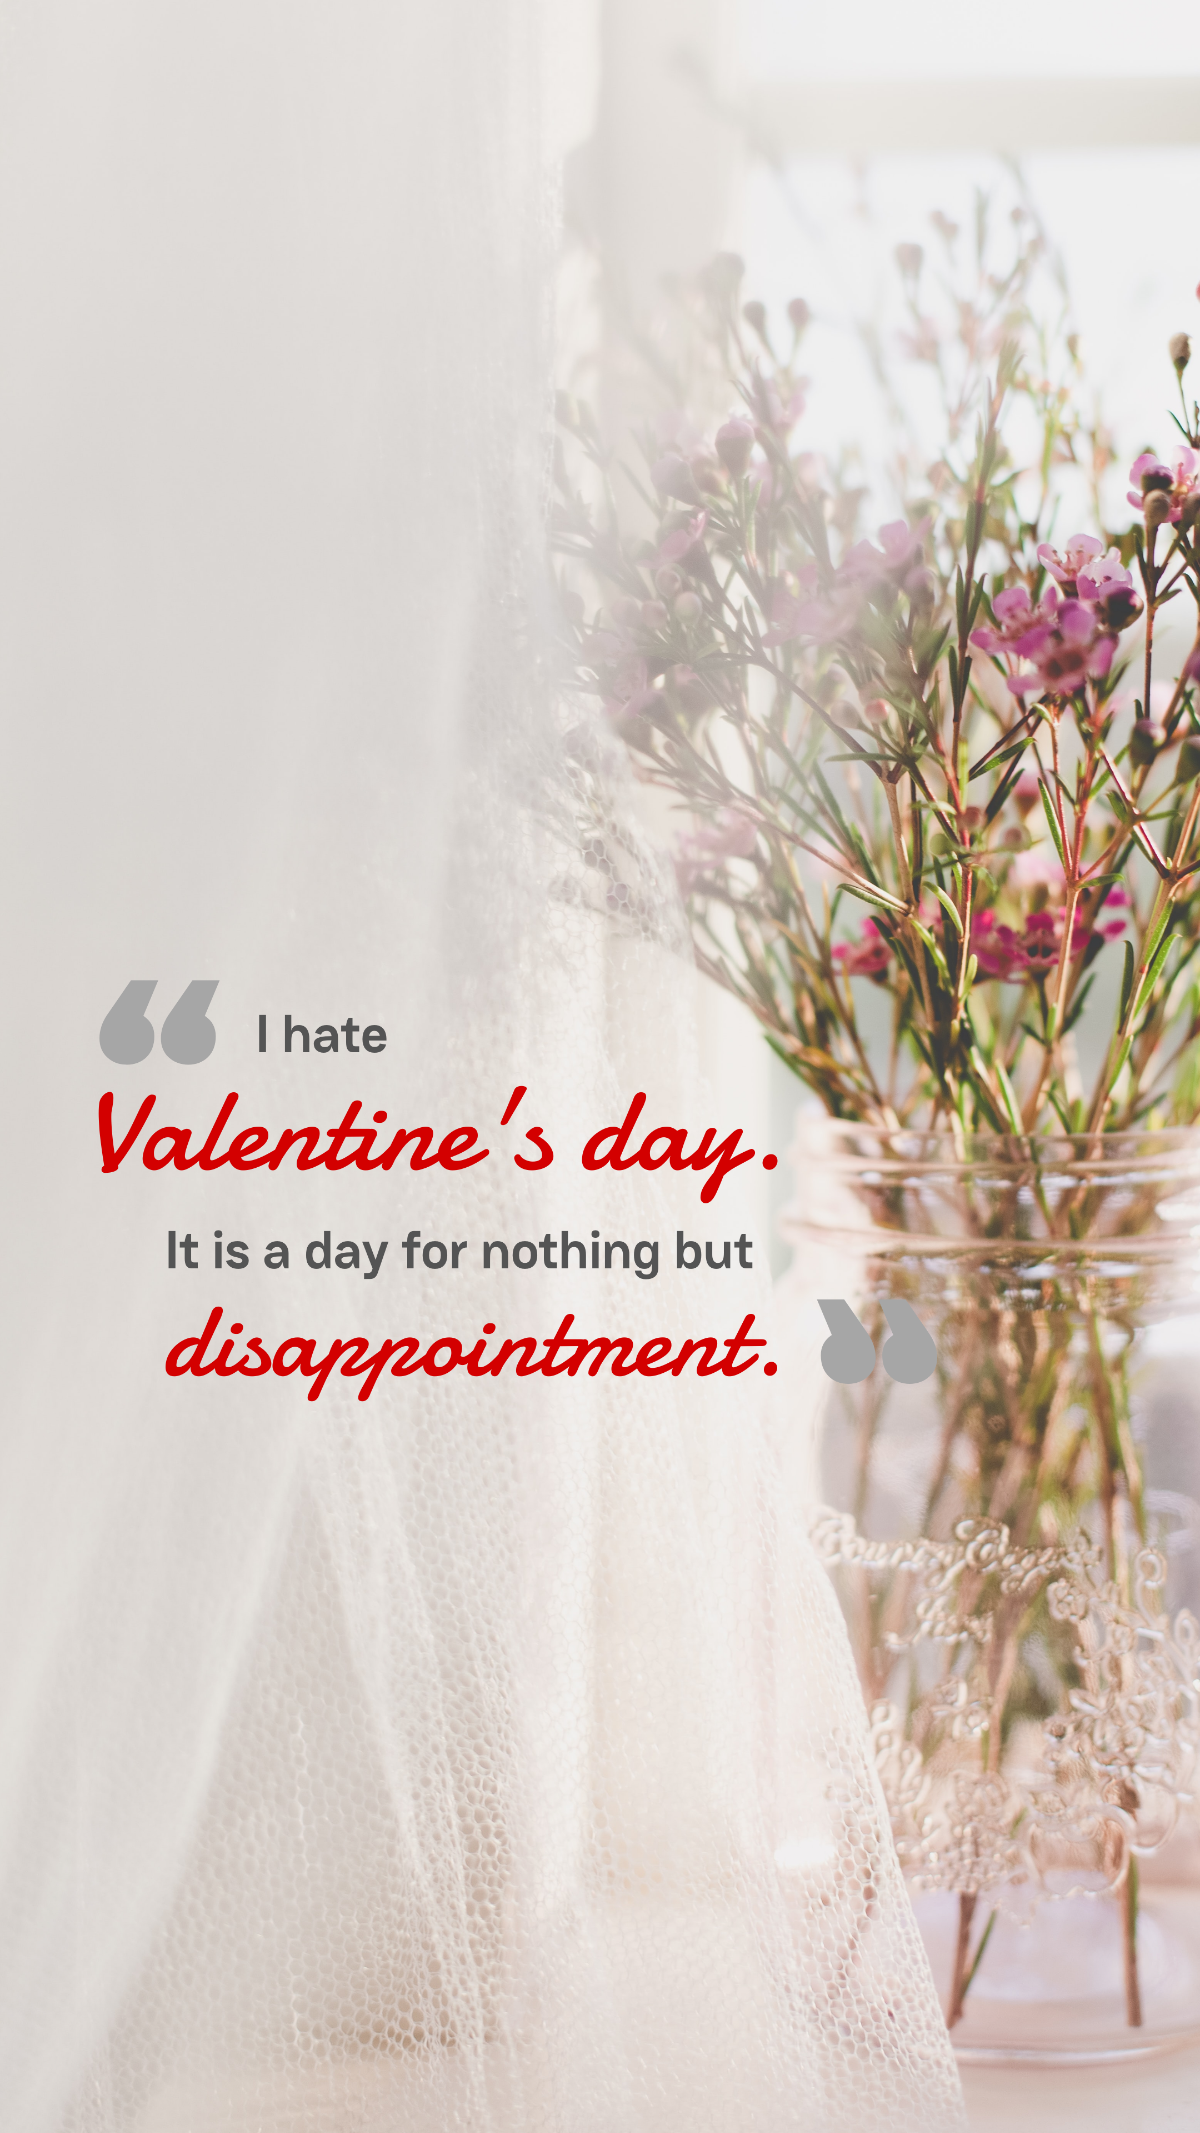 Larisa Oleynik - I hate Valentine's day. It is a day for nothing but disappointment. Template